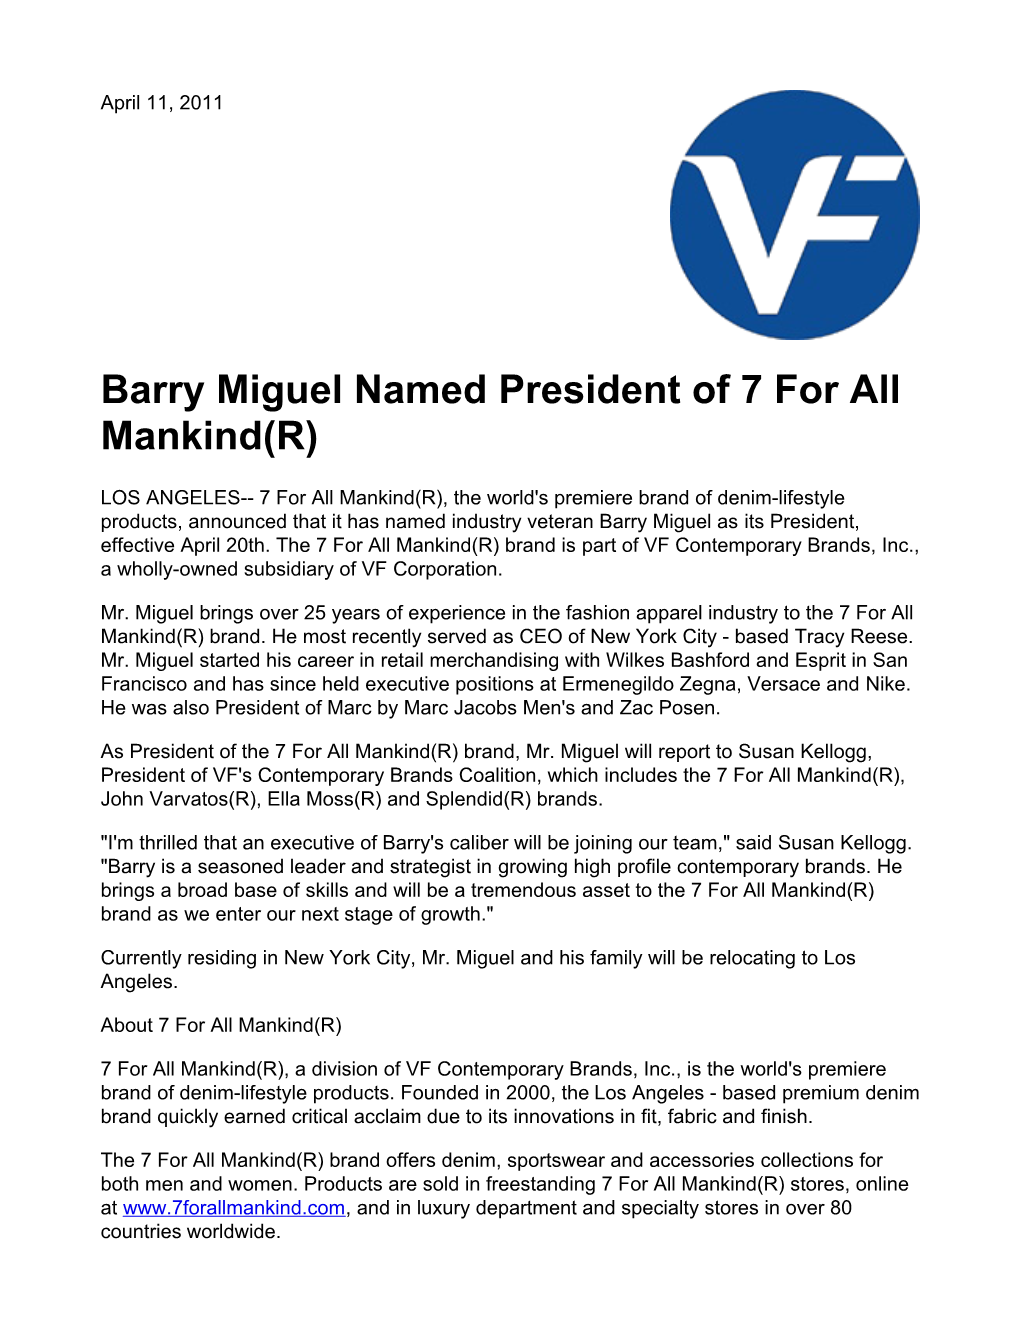 Barry Miguel Named President of 7 for All Mankind(R)